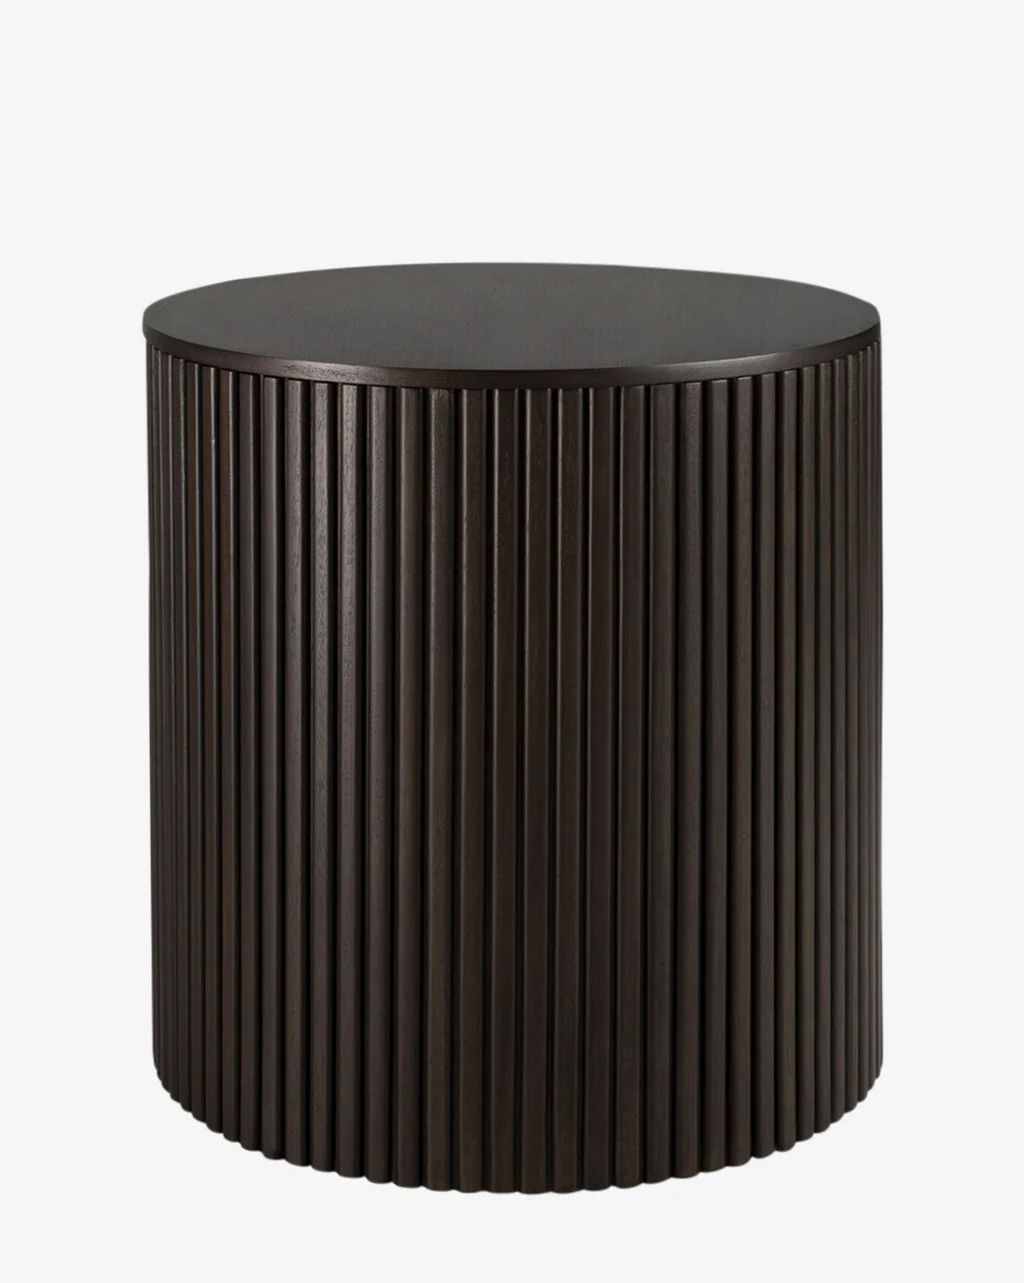 Xena Round Side Table | McGee & Co.